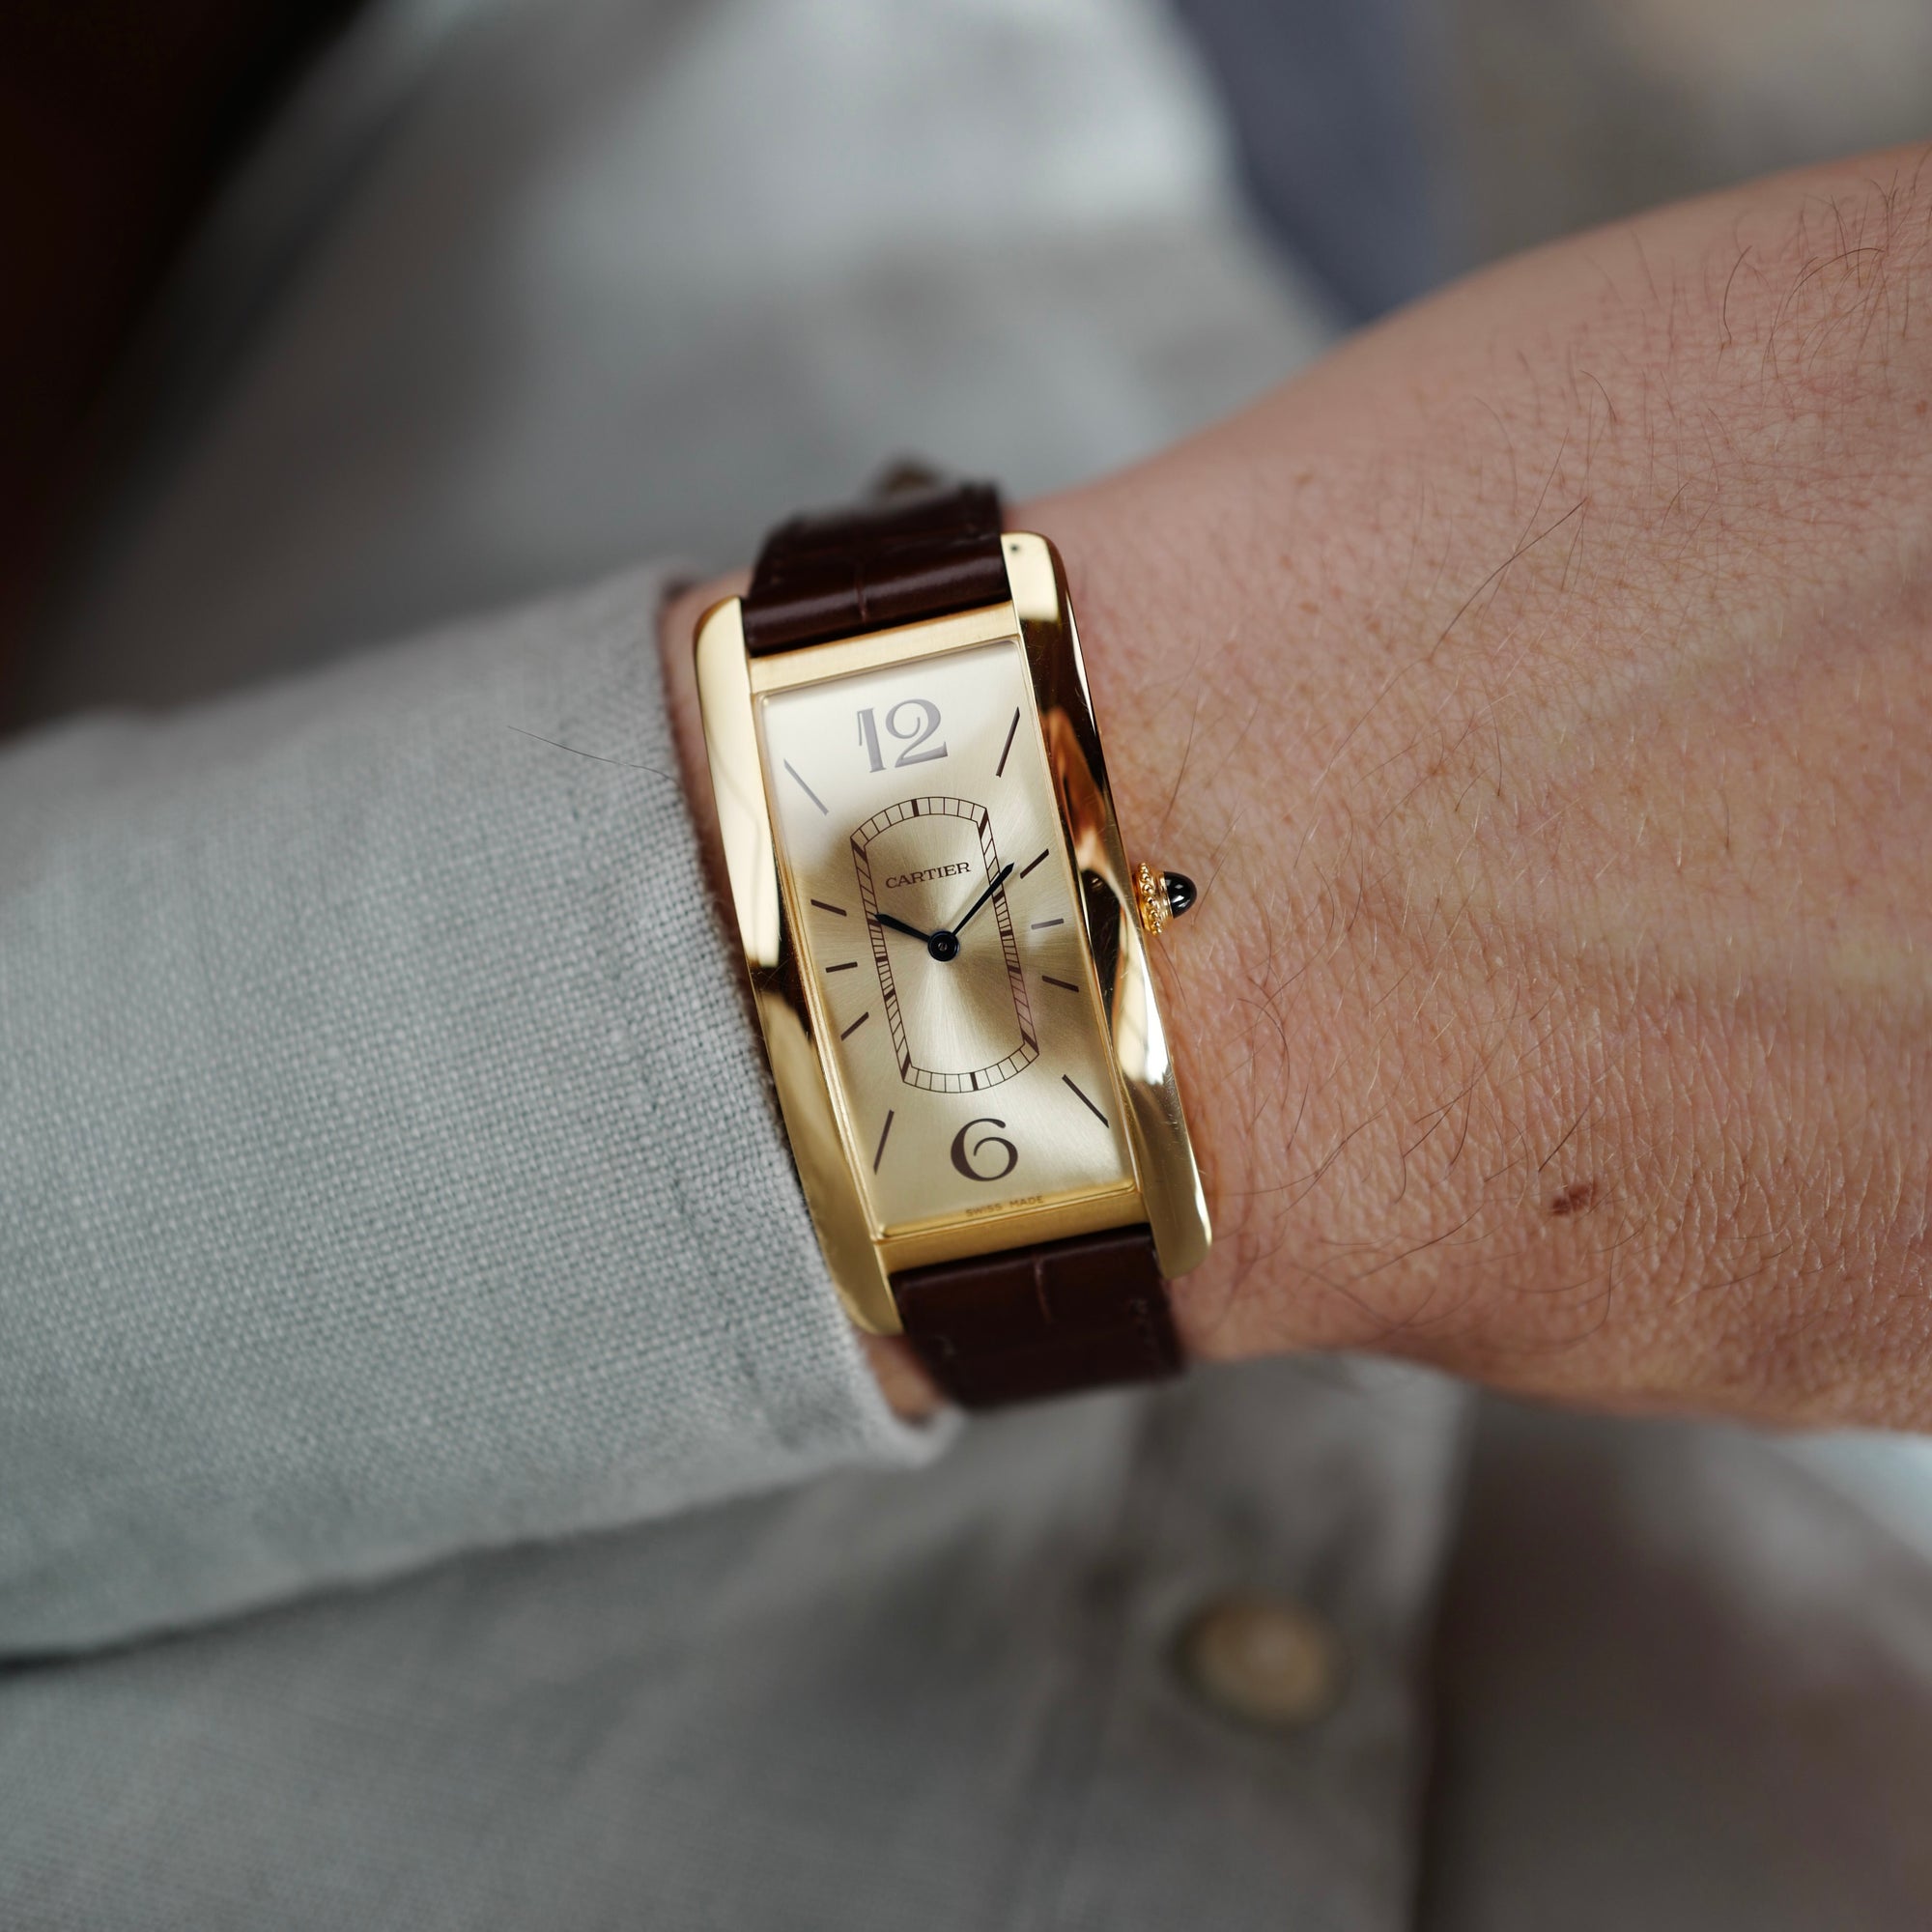 Cartier - Cartier Yellow Gold Tank Cintree Watch Ref. 4123 (NEW ARRIVAL) - The Keystone Watches